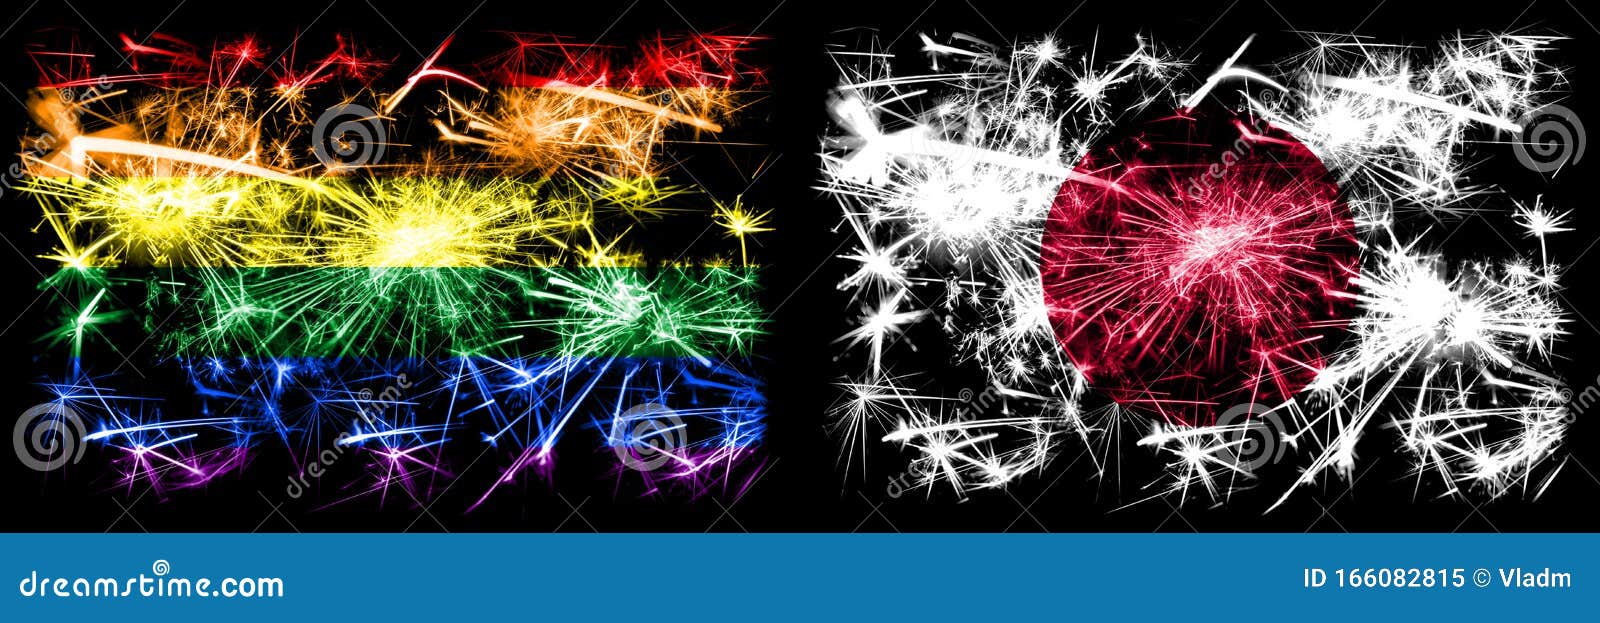 Gay Pride Vs Japan Japanese New Year Celebration Sparkling Fireworks Flags Concept Background Abstract Combination Of Two Flags Stock Image Image Of Nuclear Event